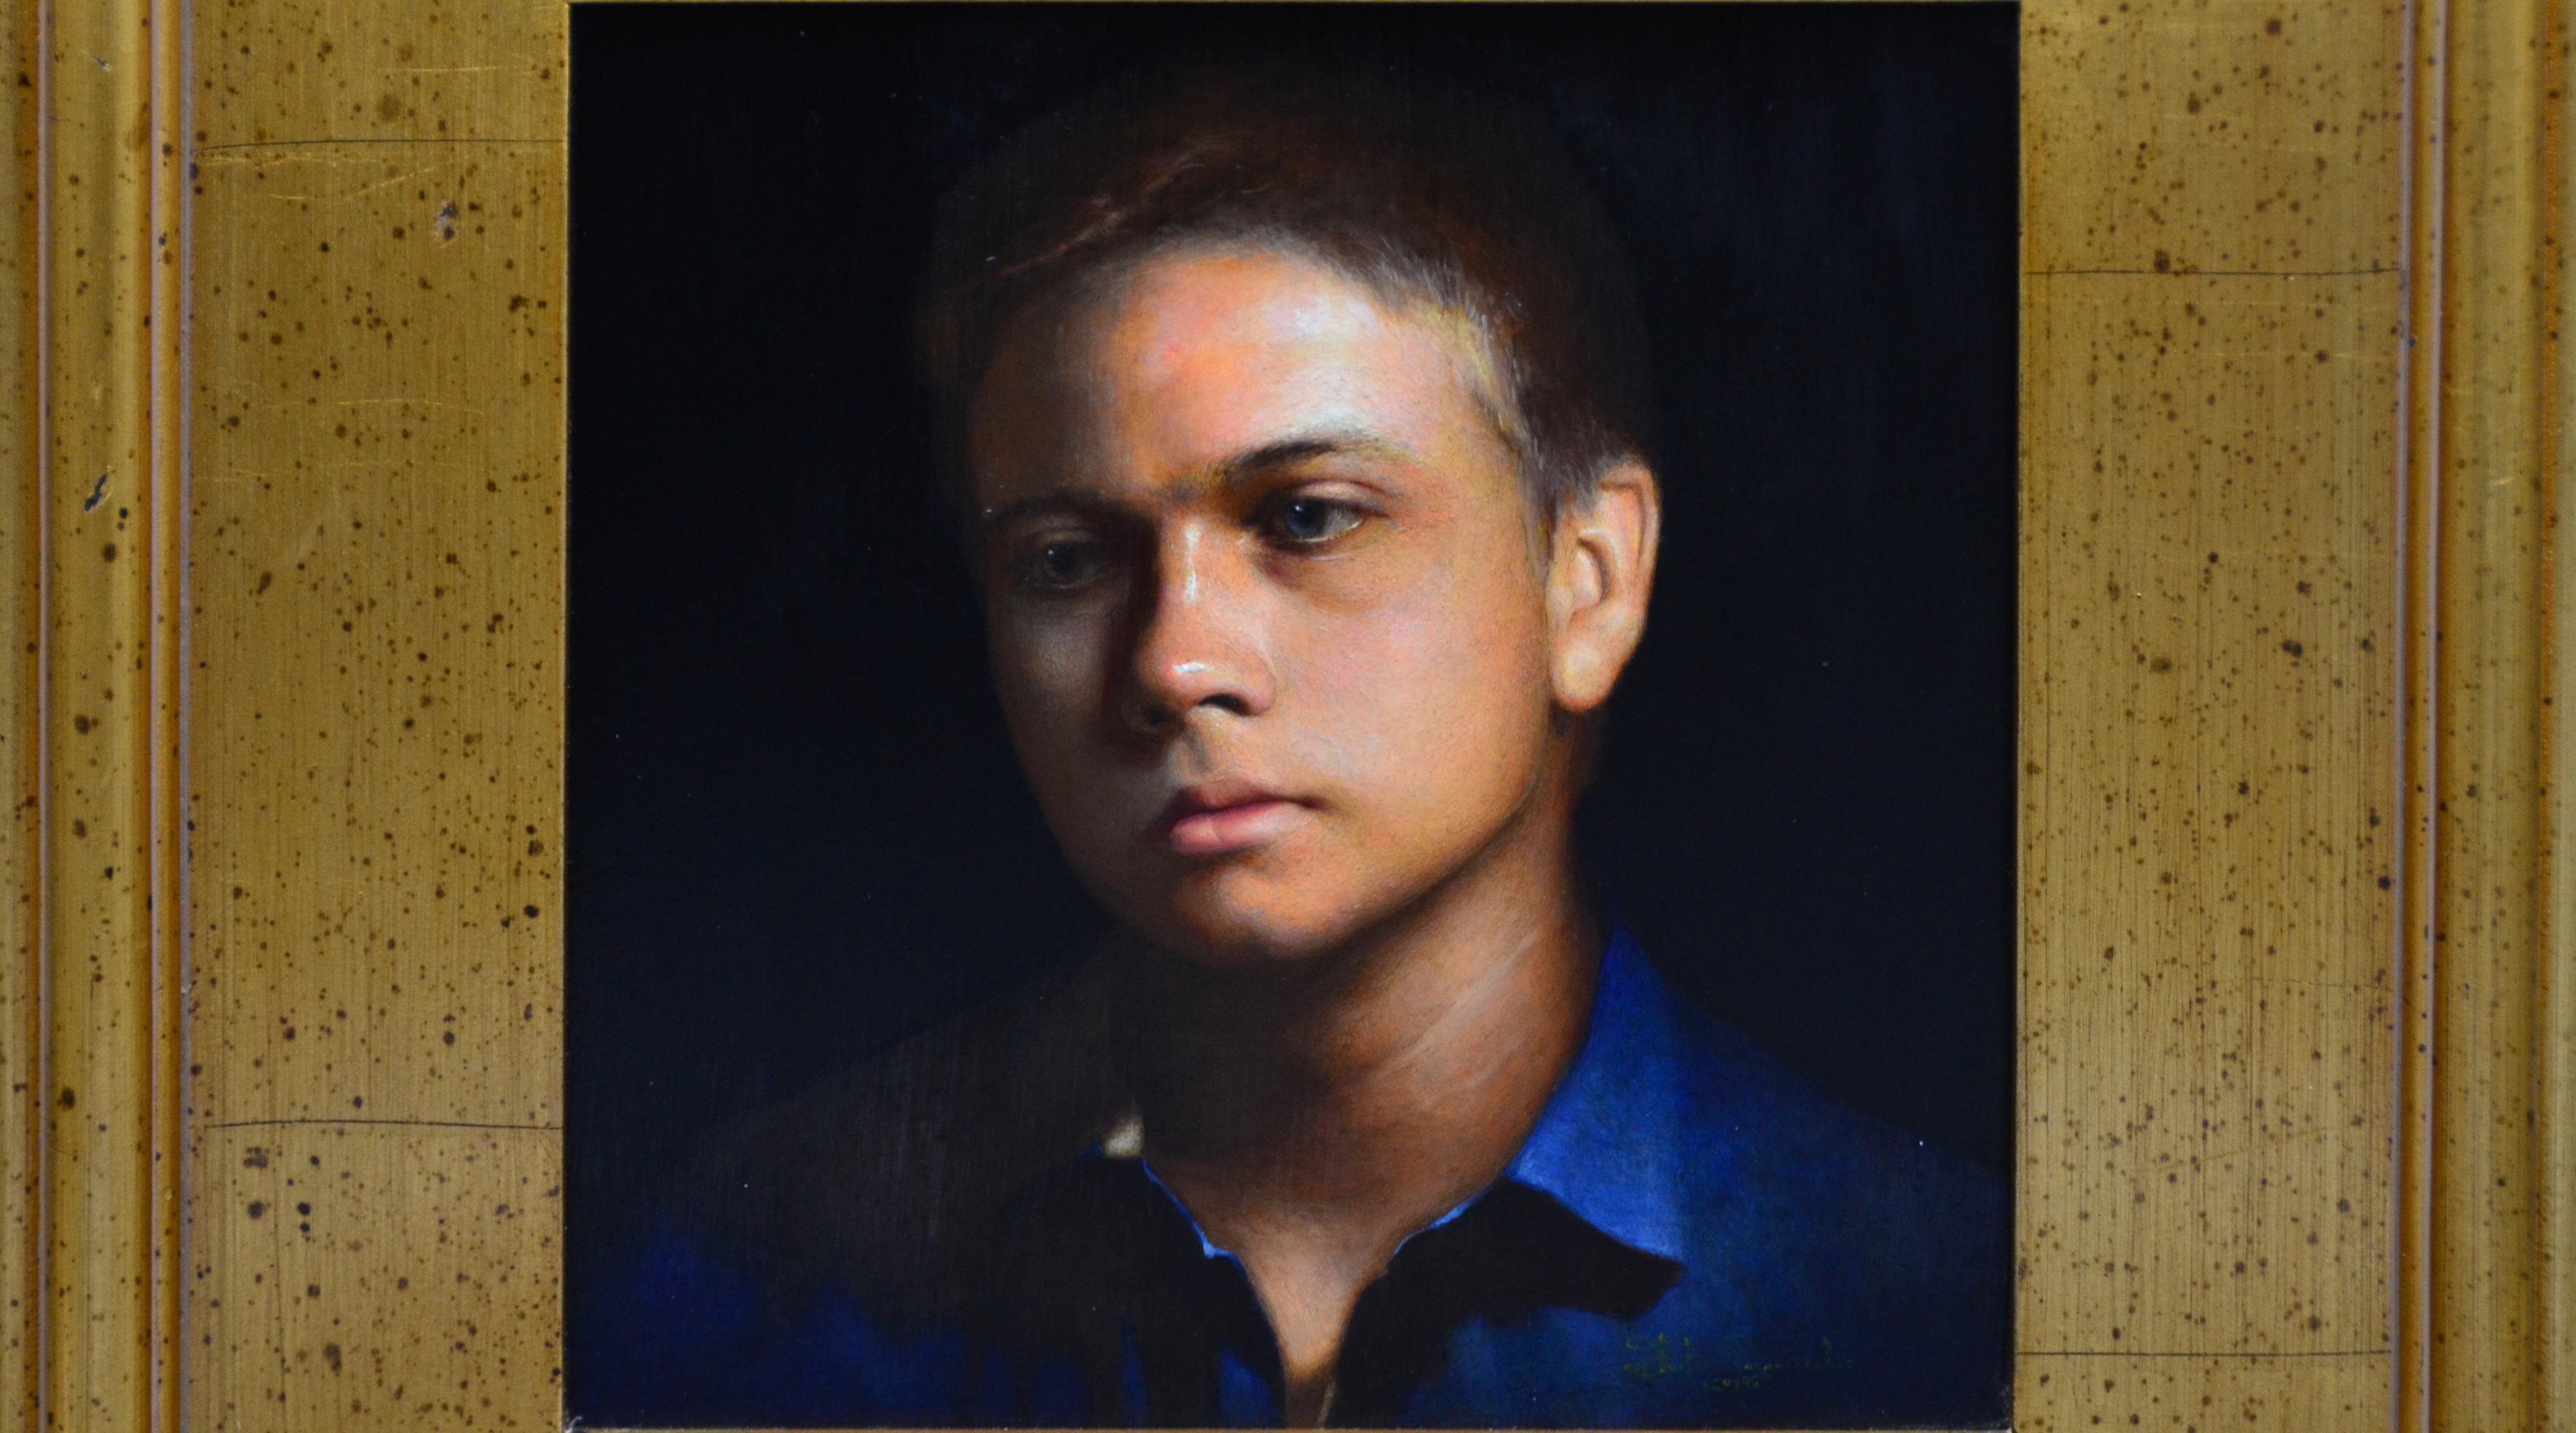 Ritratto dell'uomo, 14 x 14 inches. Oil on panel with gilded frame. Painting by artist Justas Varpucanskis. 21st century contemporary artwork that employs techniques, philosophy and visual language of the Italian High Renaissance while